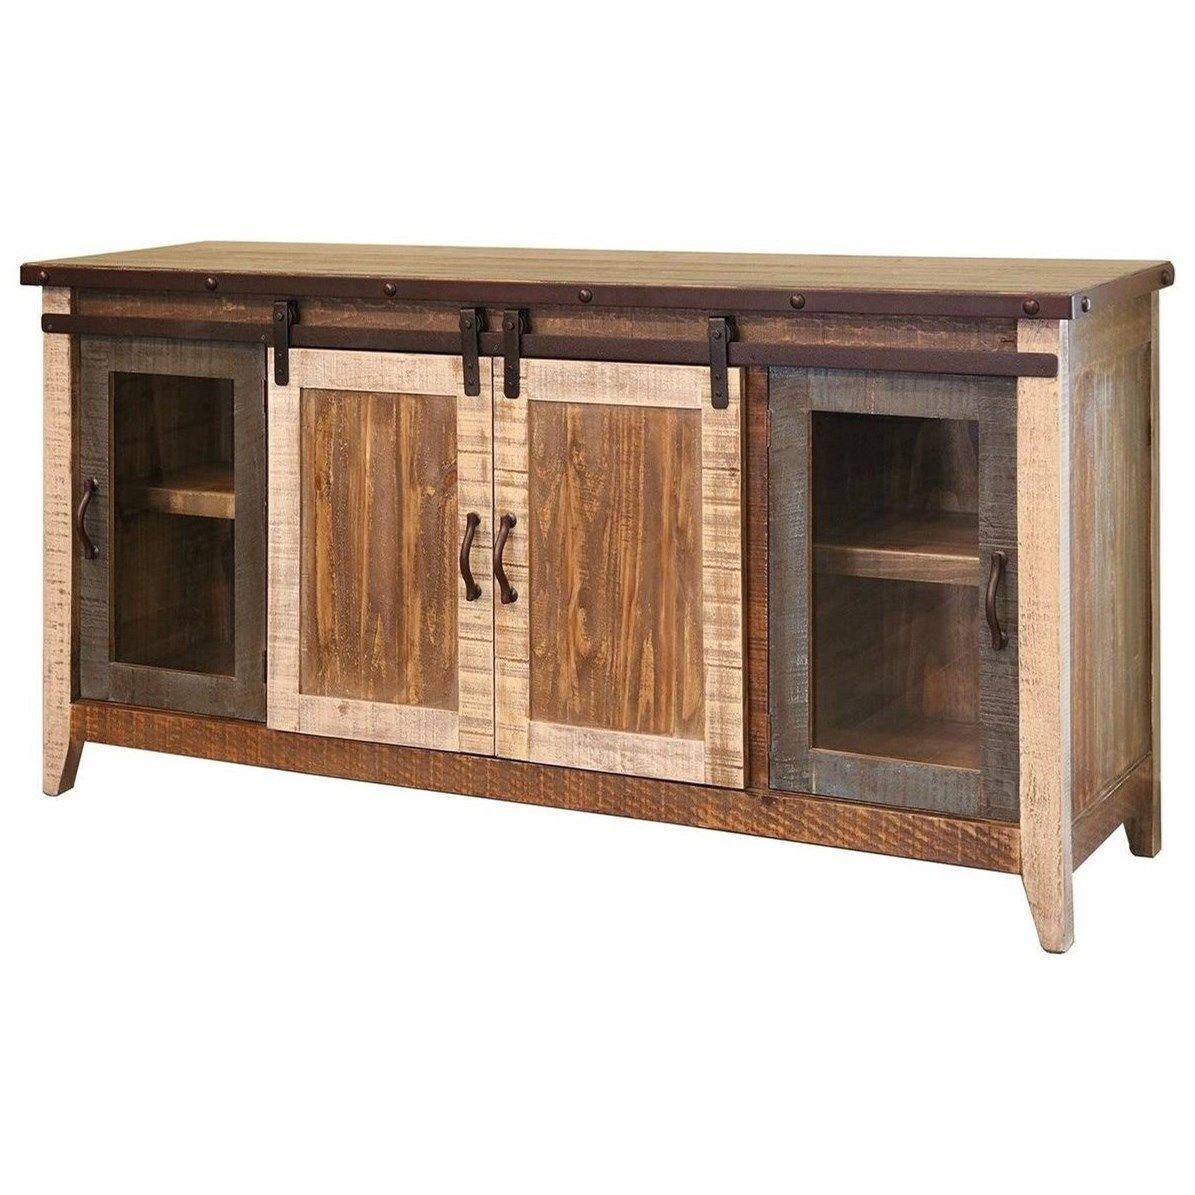 Vfm Signature 900 Antique Rustic 70" Tv Stand With Sliding With Robinson Rustic Farmhouse Sliding Barn Door Corner Tv Stands (View 11 of 15)